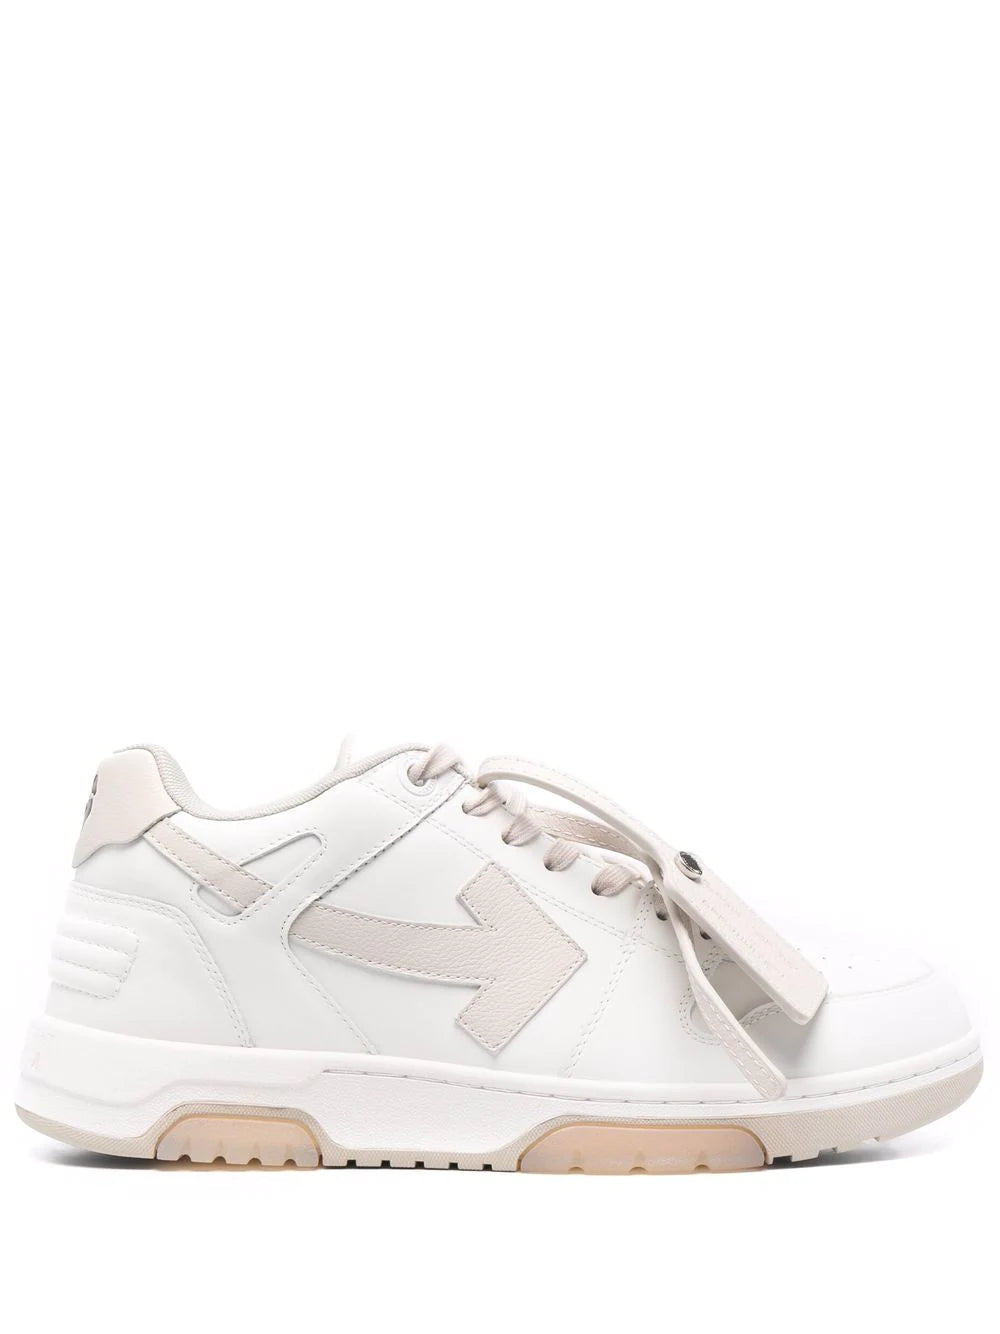 Off-White Out of Office Leather Trainers in White/Beige